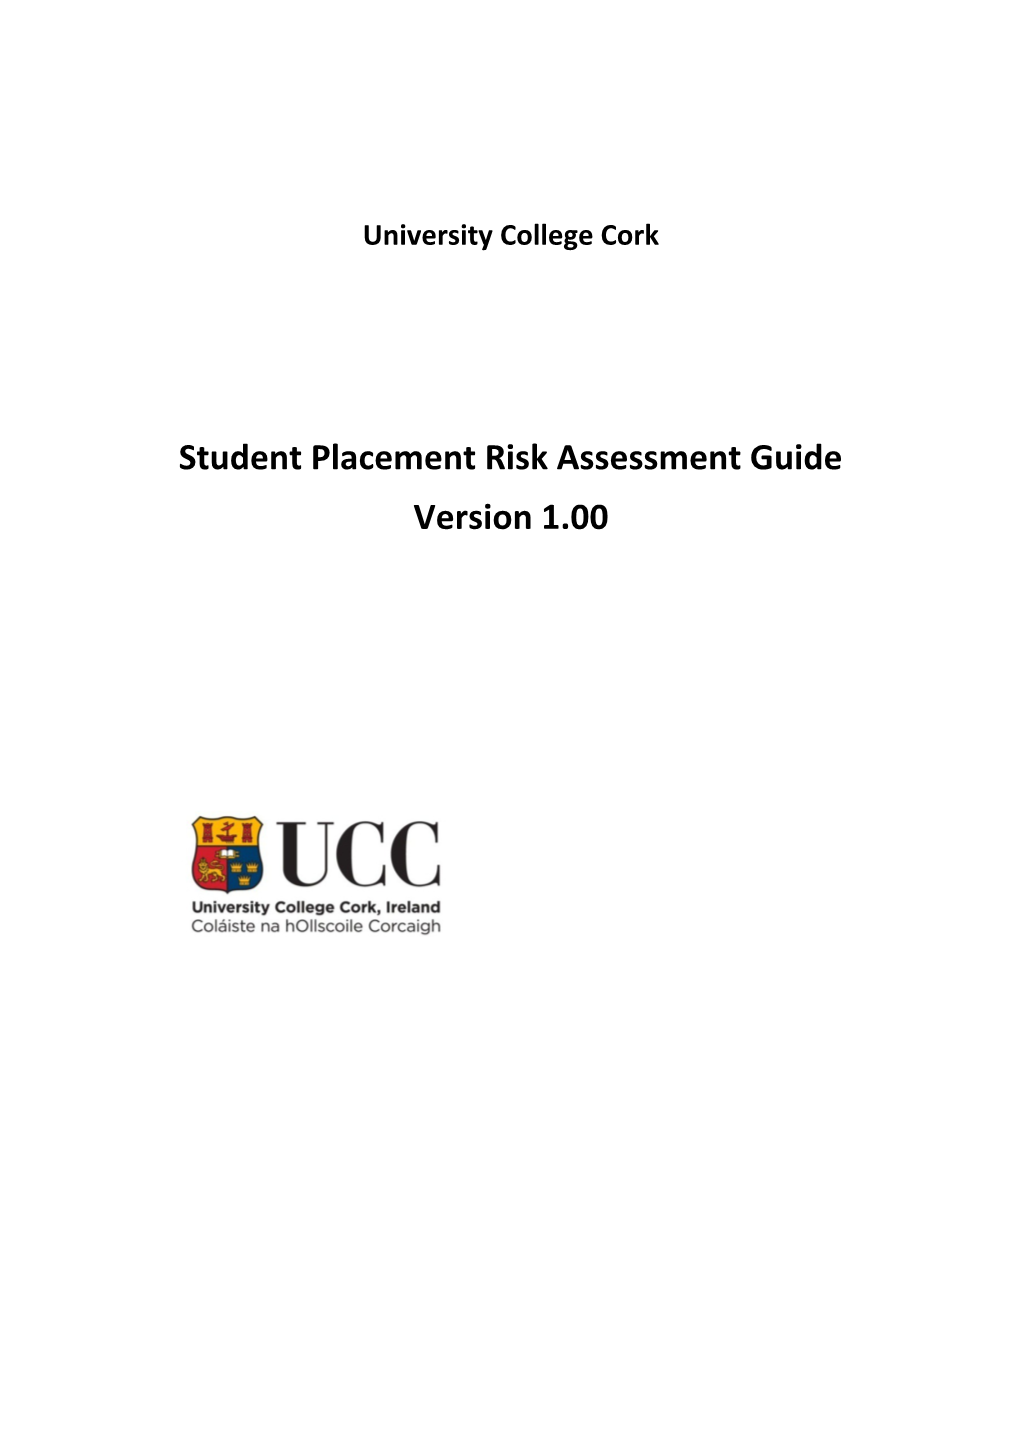 Student Placement Risk Assessment Guide